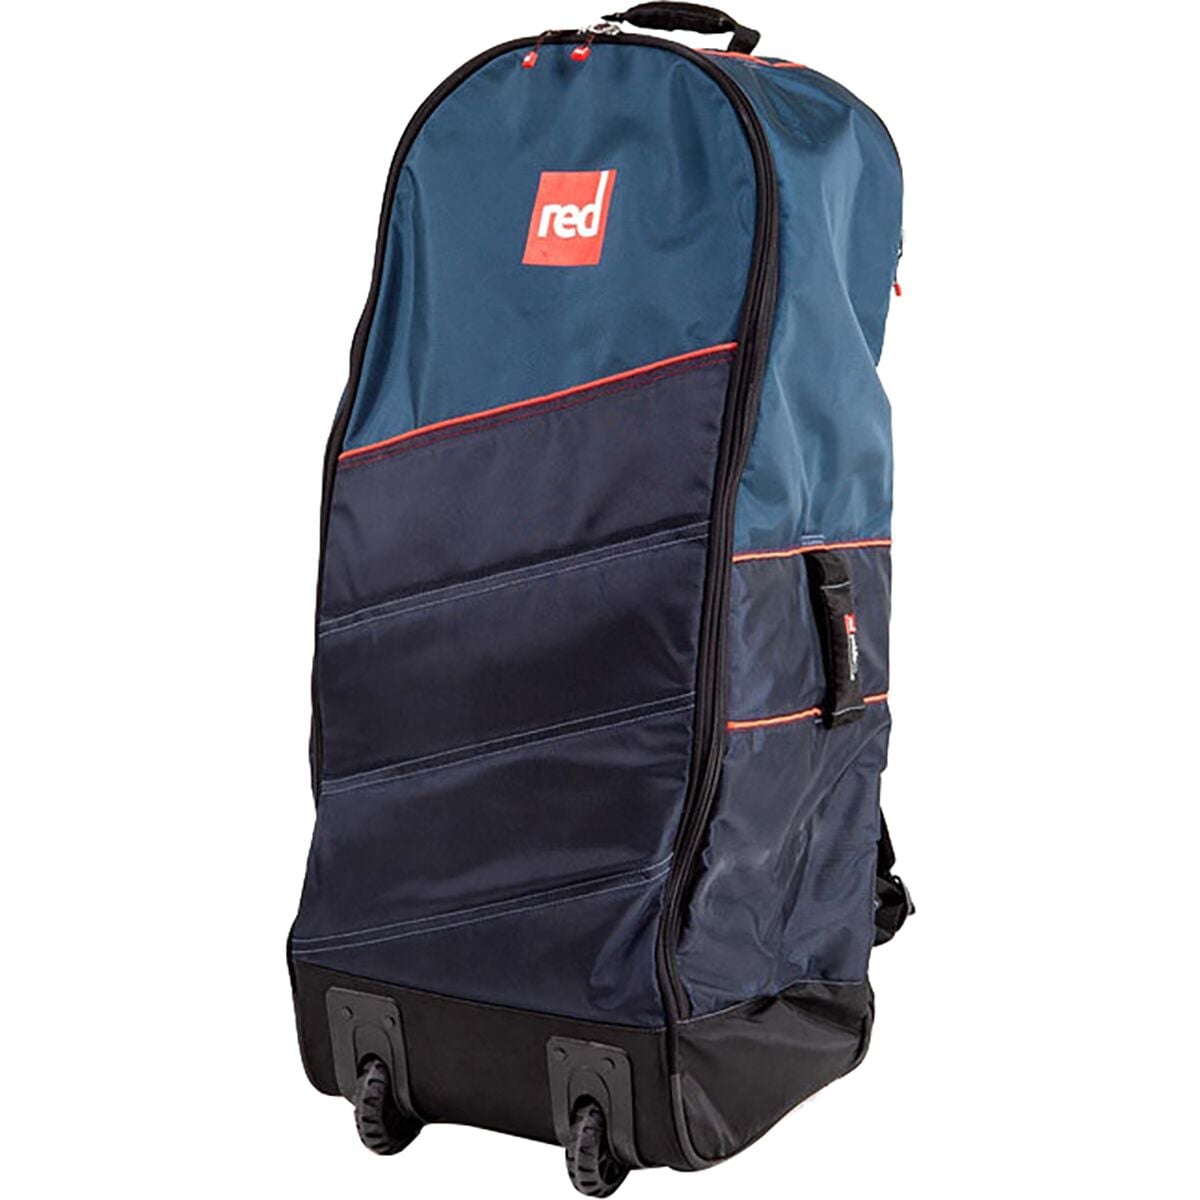 Red Paddle Co. All Terrain Board Bag - 2021